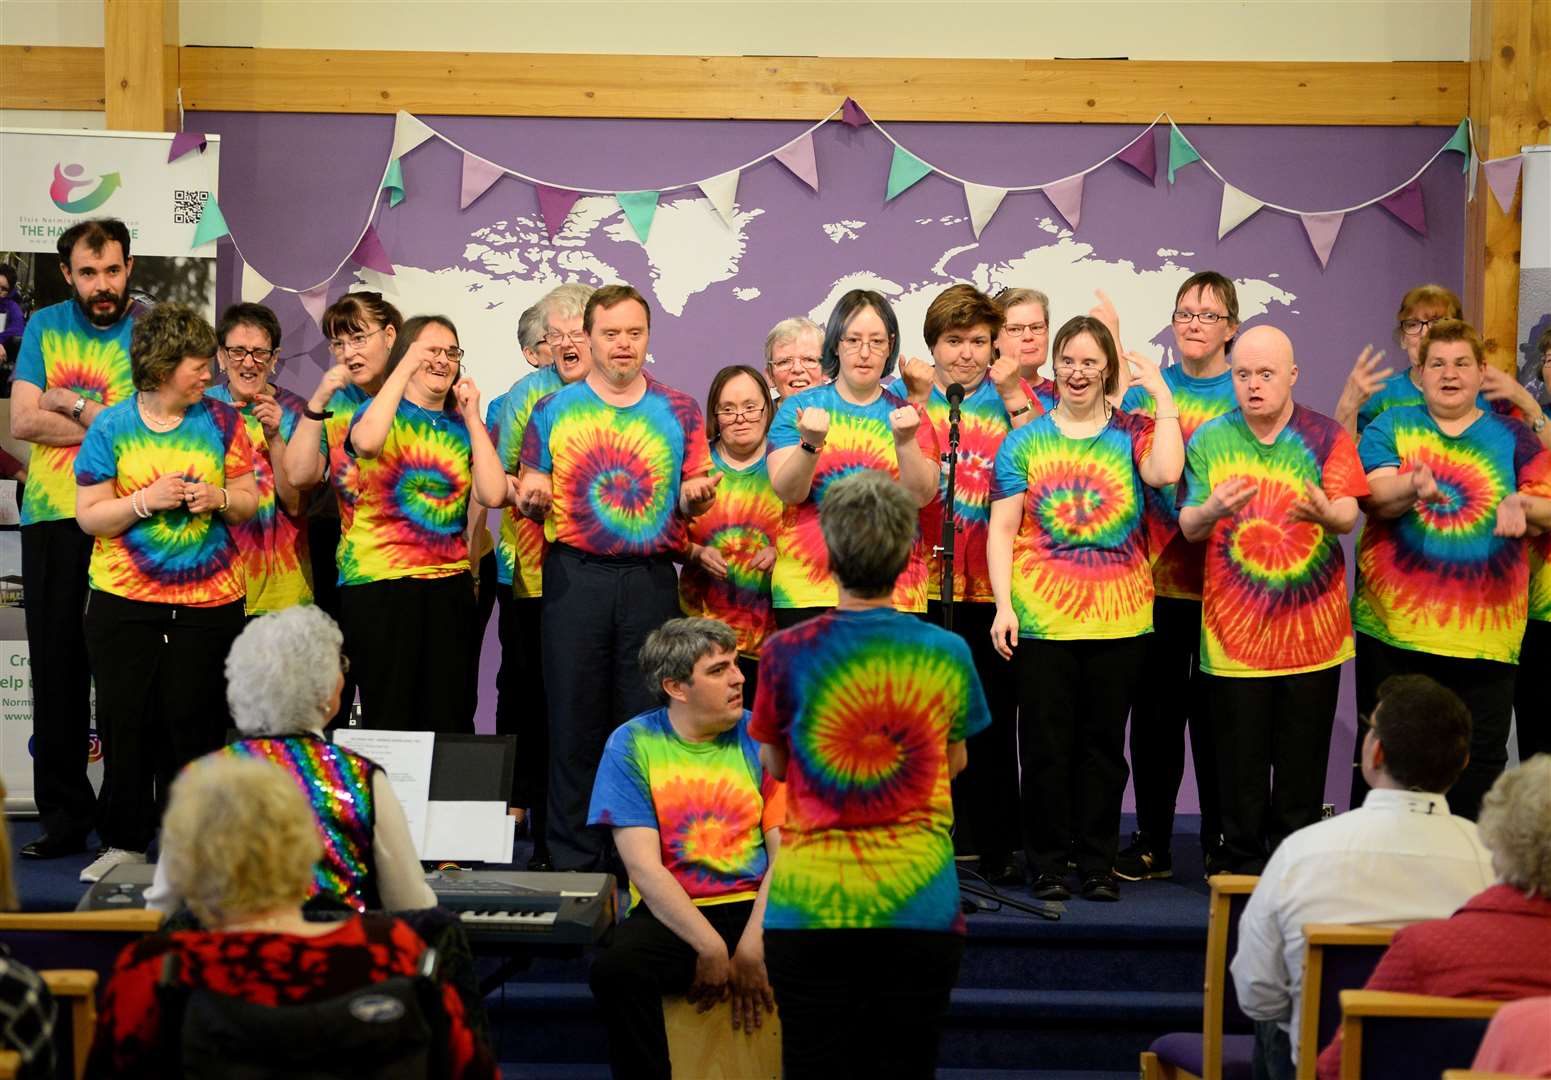 The Rainbow Singers were a popular act.